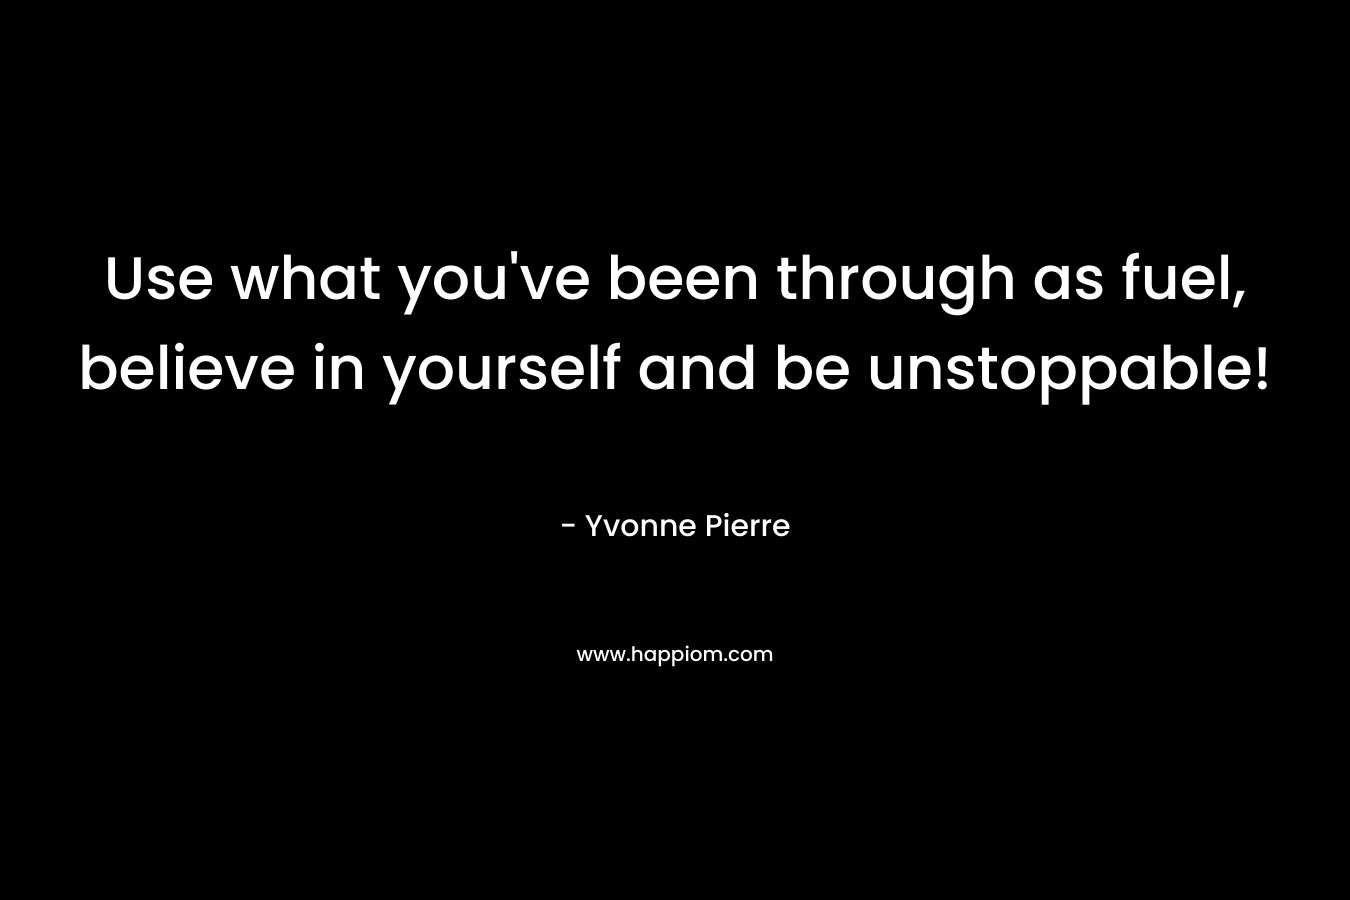 Use what you’ve been through as fuel, believe in yourself and be unstoppable! – Yvonne Pierre